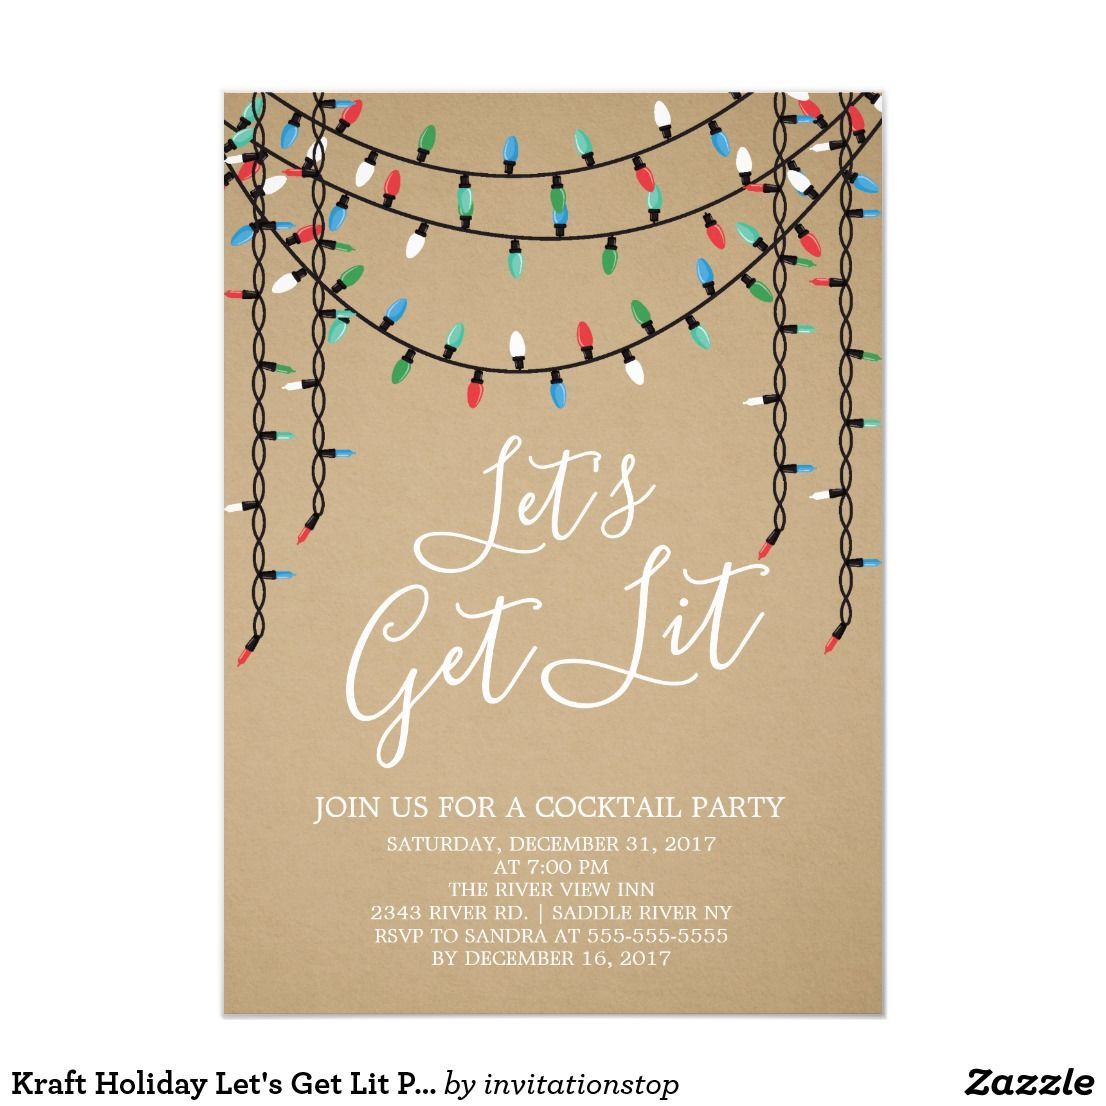 Kraft Holiday Let's Get Lit Party Invitation | Zazzle.com -   17 holiday Party quotes ideas